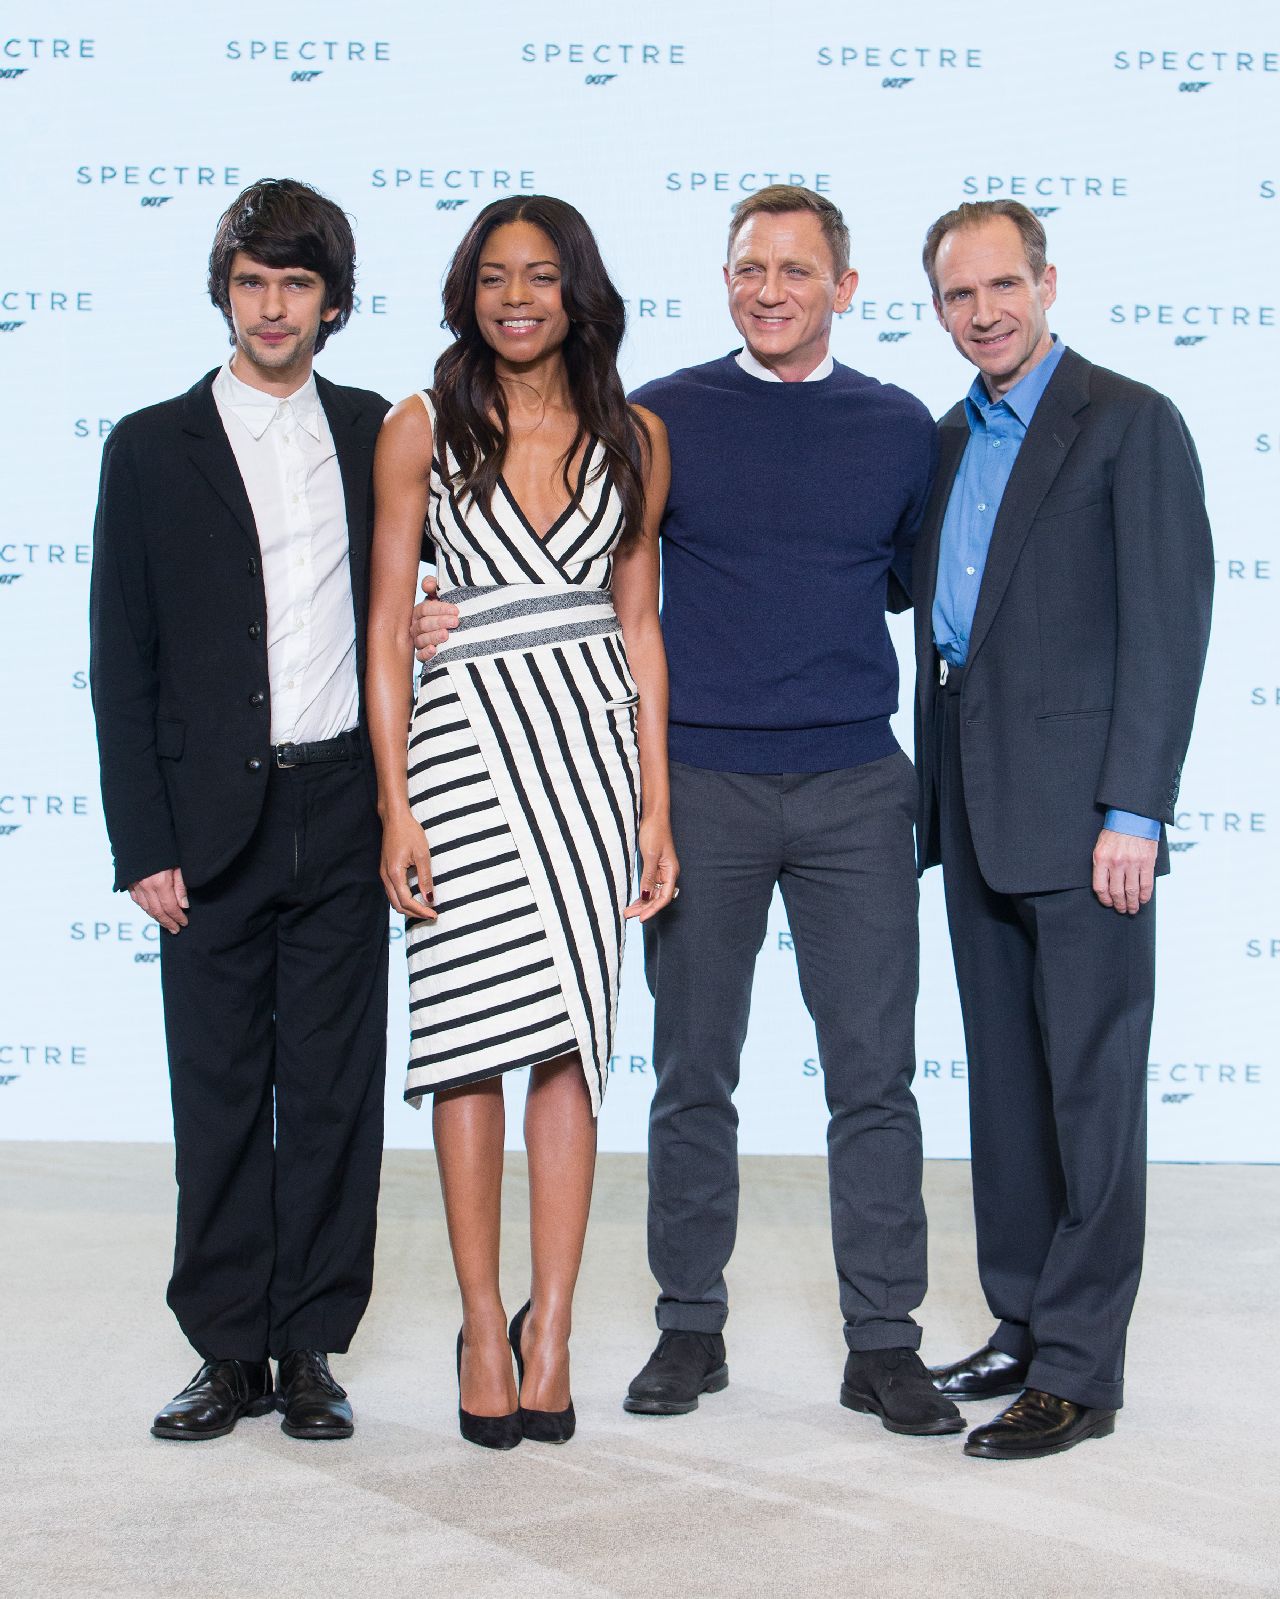 Eon Productions, Metro-Goldwyn-Mayer and Sony Pictures Entertainment announce the 24th James Bond adventure " SPECTRE. " Pictured: (L to R) Ben Whishaw, Noamie Harris, Daniel Craig and Ralph Fiennes.